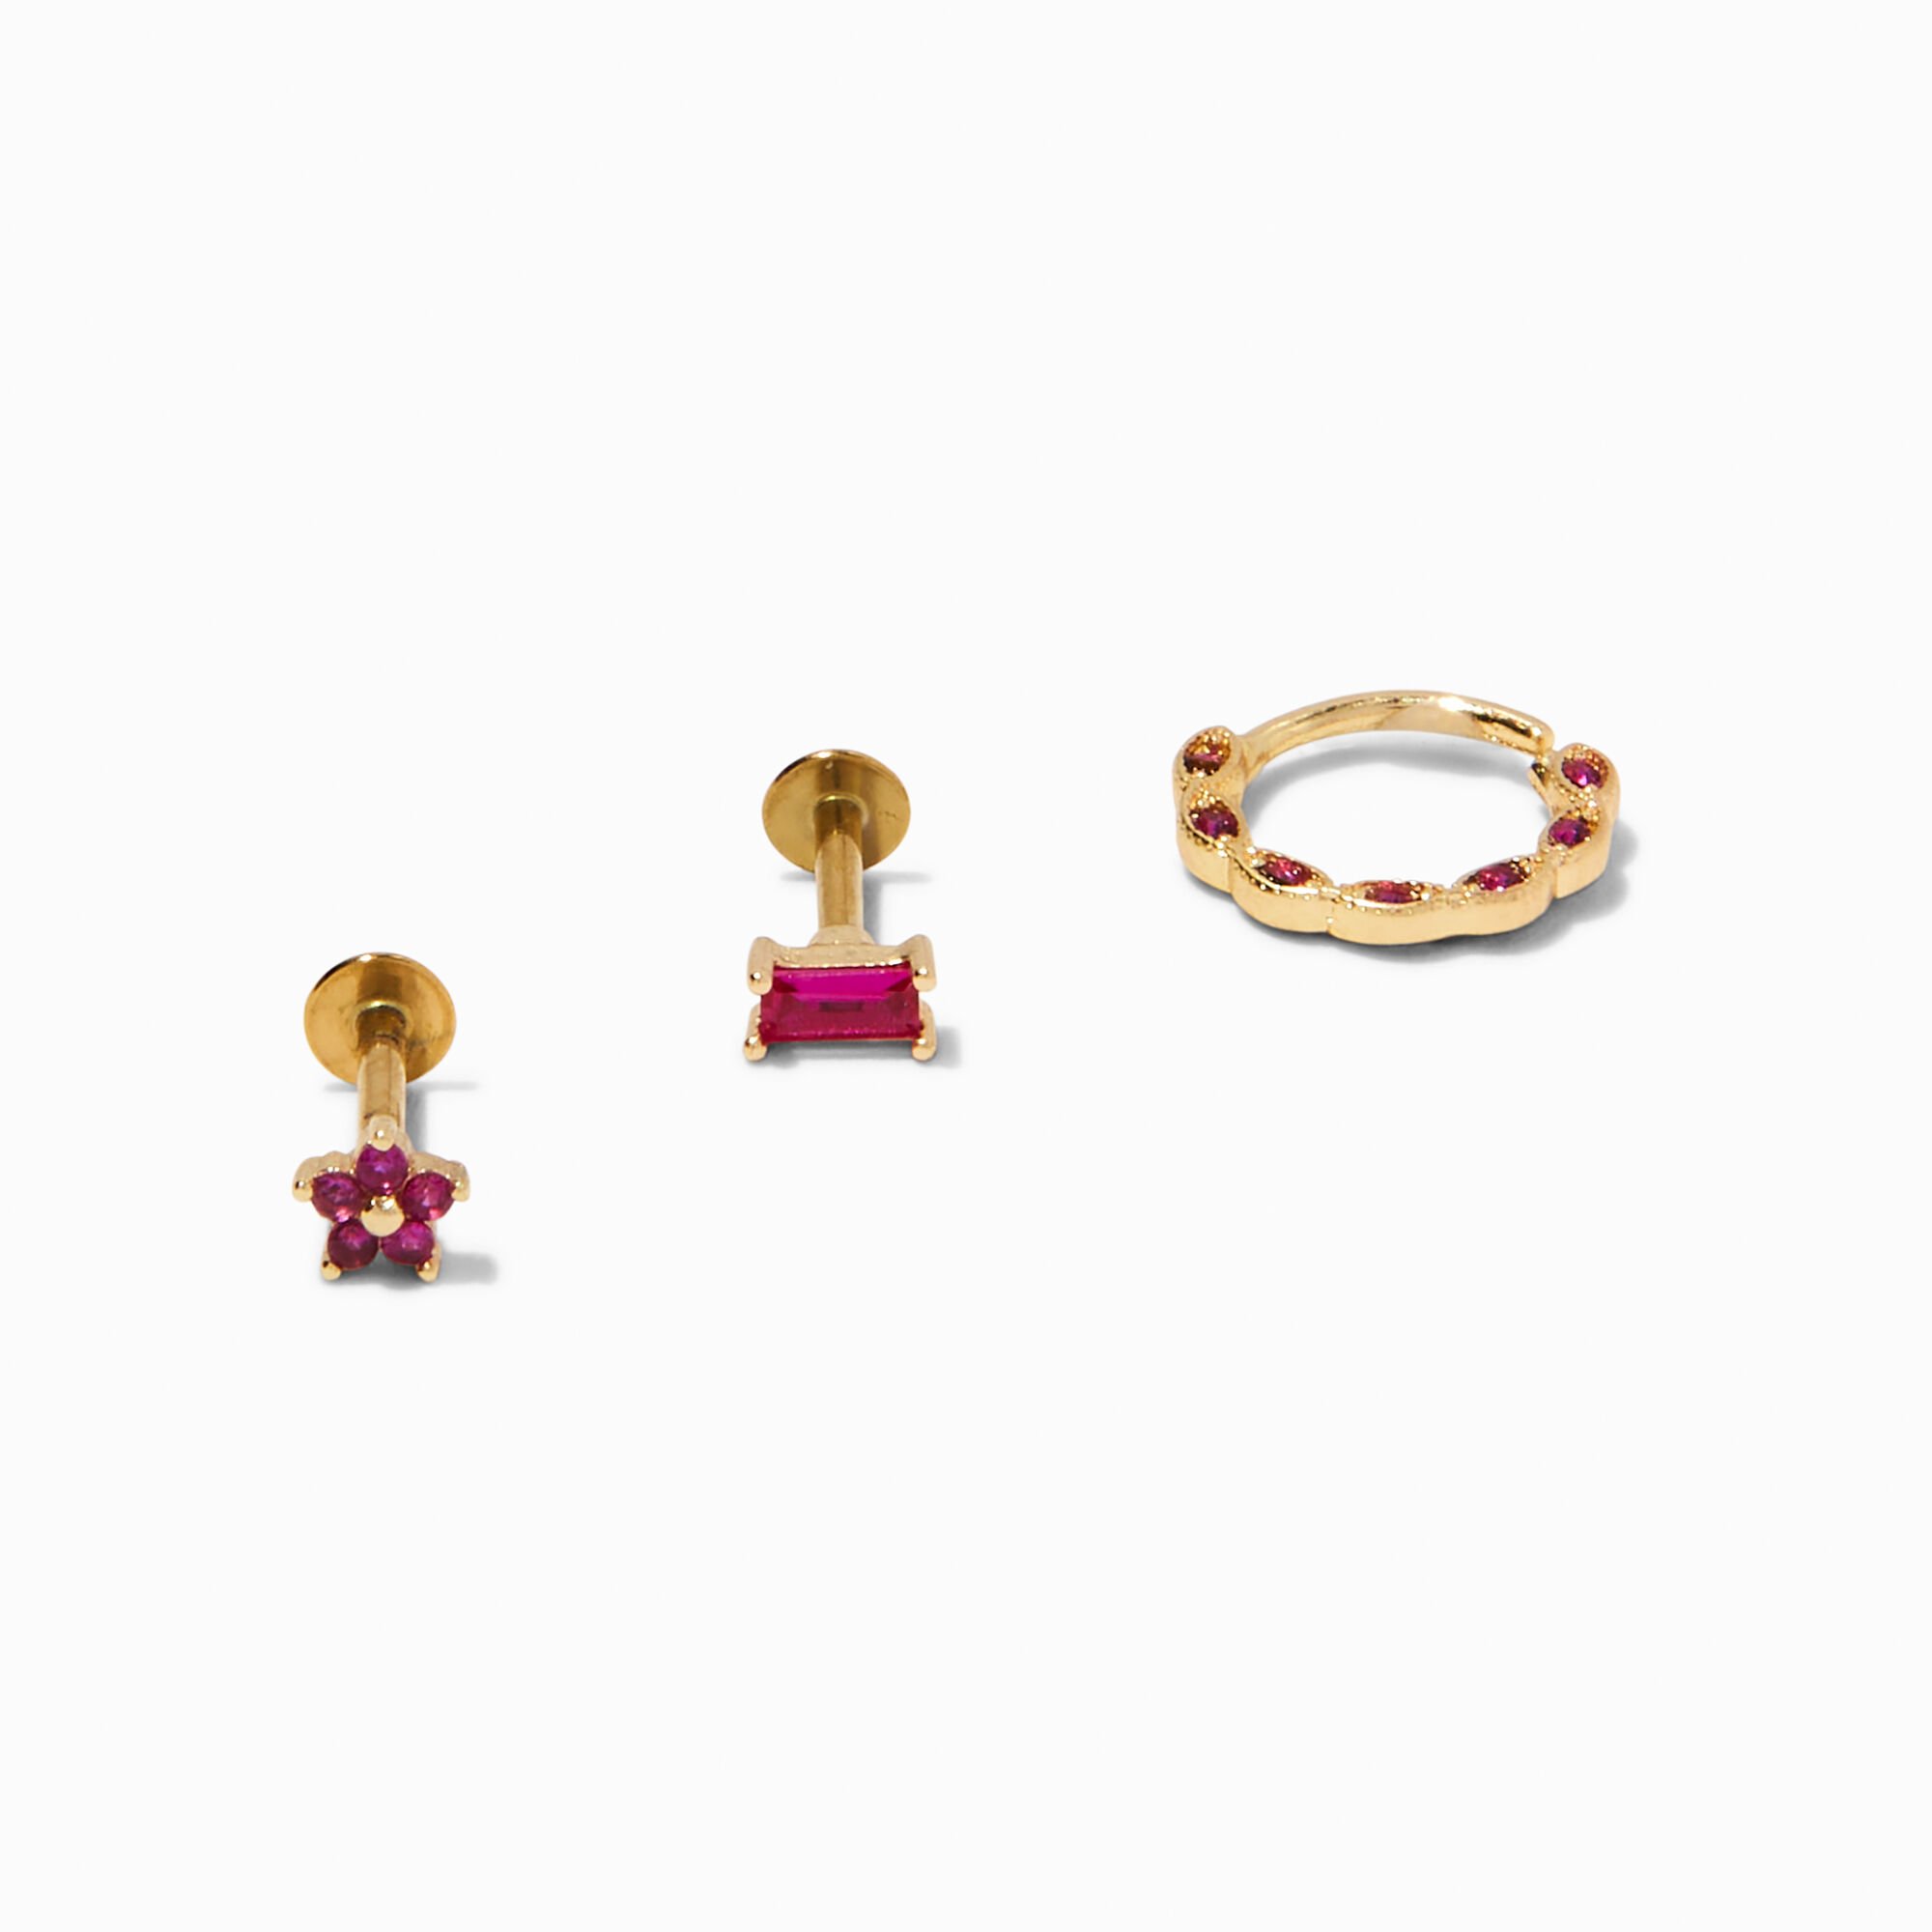 View Claires Gold 16G Flower Baguette Helix Earrings 3 Pack Pink information